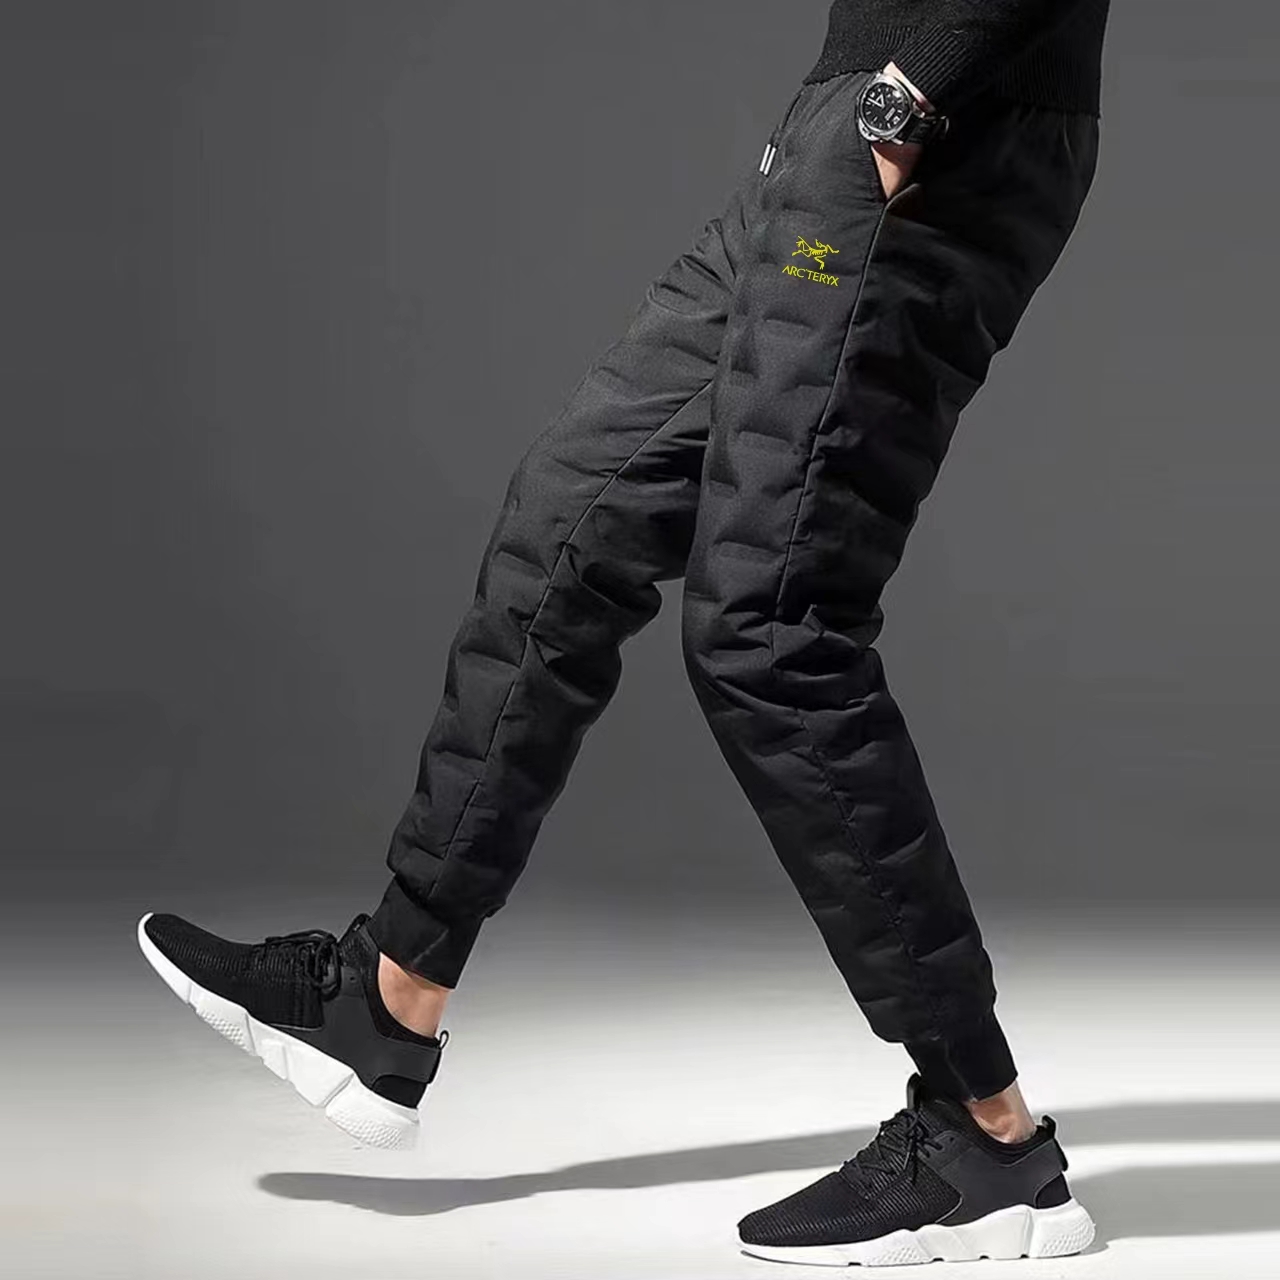 The Online Shopping
 Arc’teryx mirror quality
 Clothing Pants & Trousers Black White Duck Down Winter Collection Fashion Casual